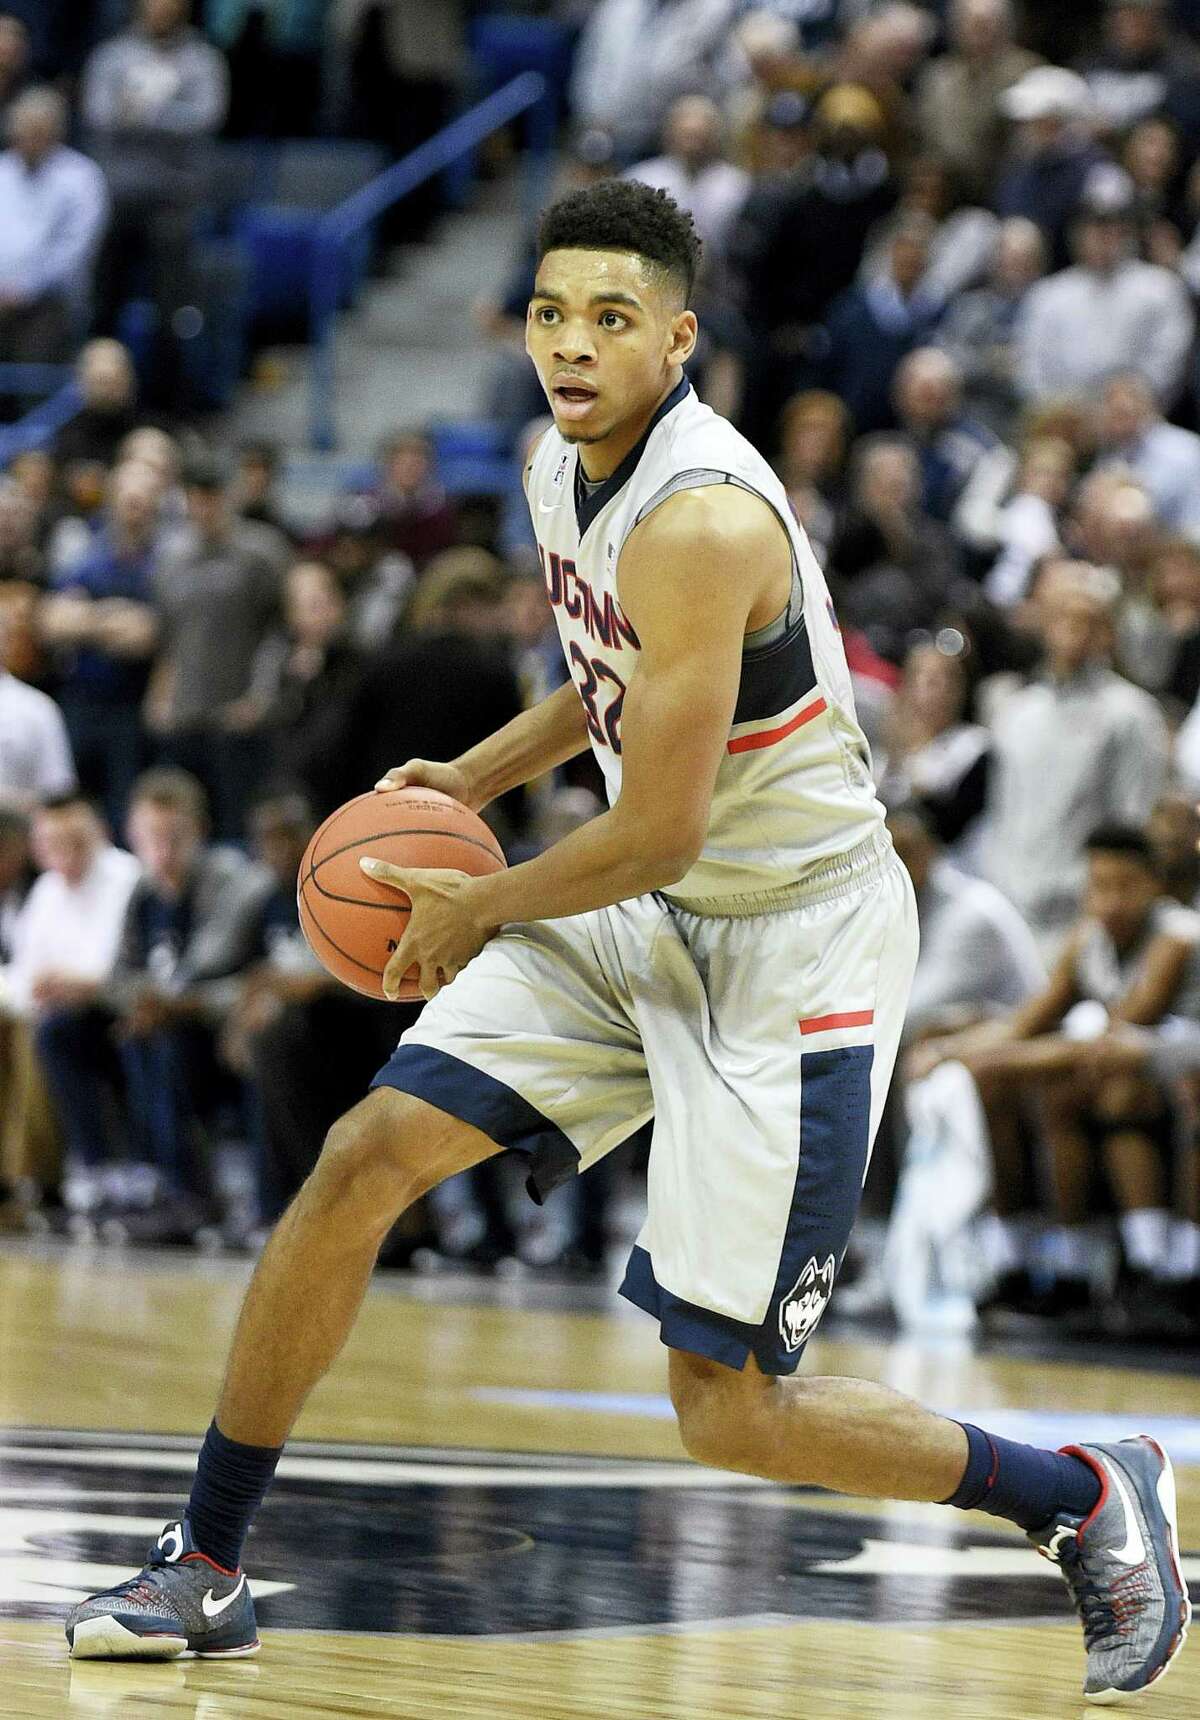 Shonn Miller and the UConn men’s basketball team will be up against one of the taller teams in the country when they face UCF on Sunday.